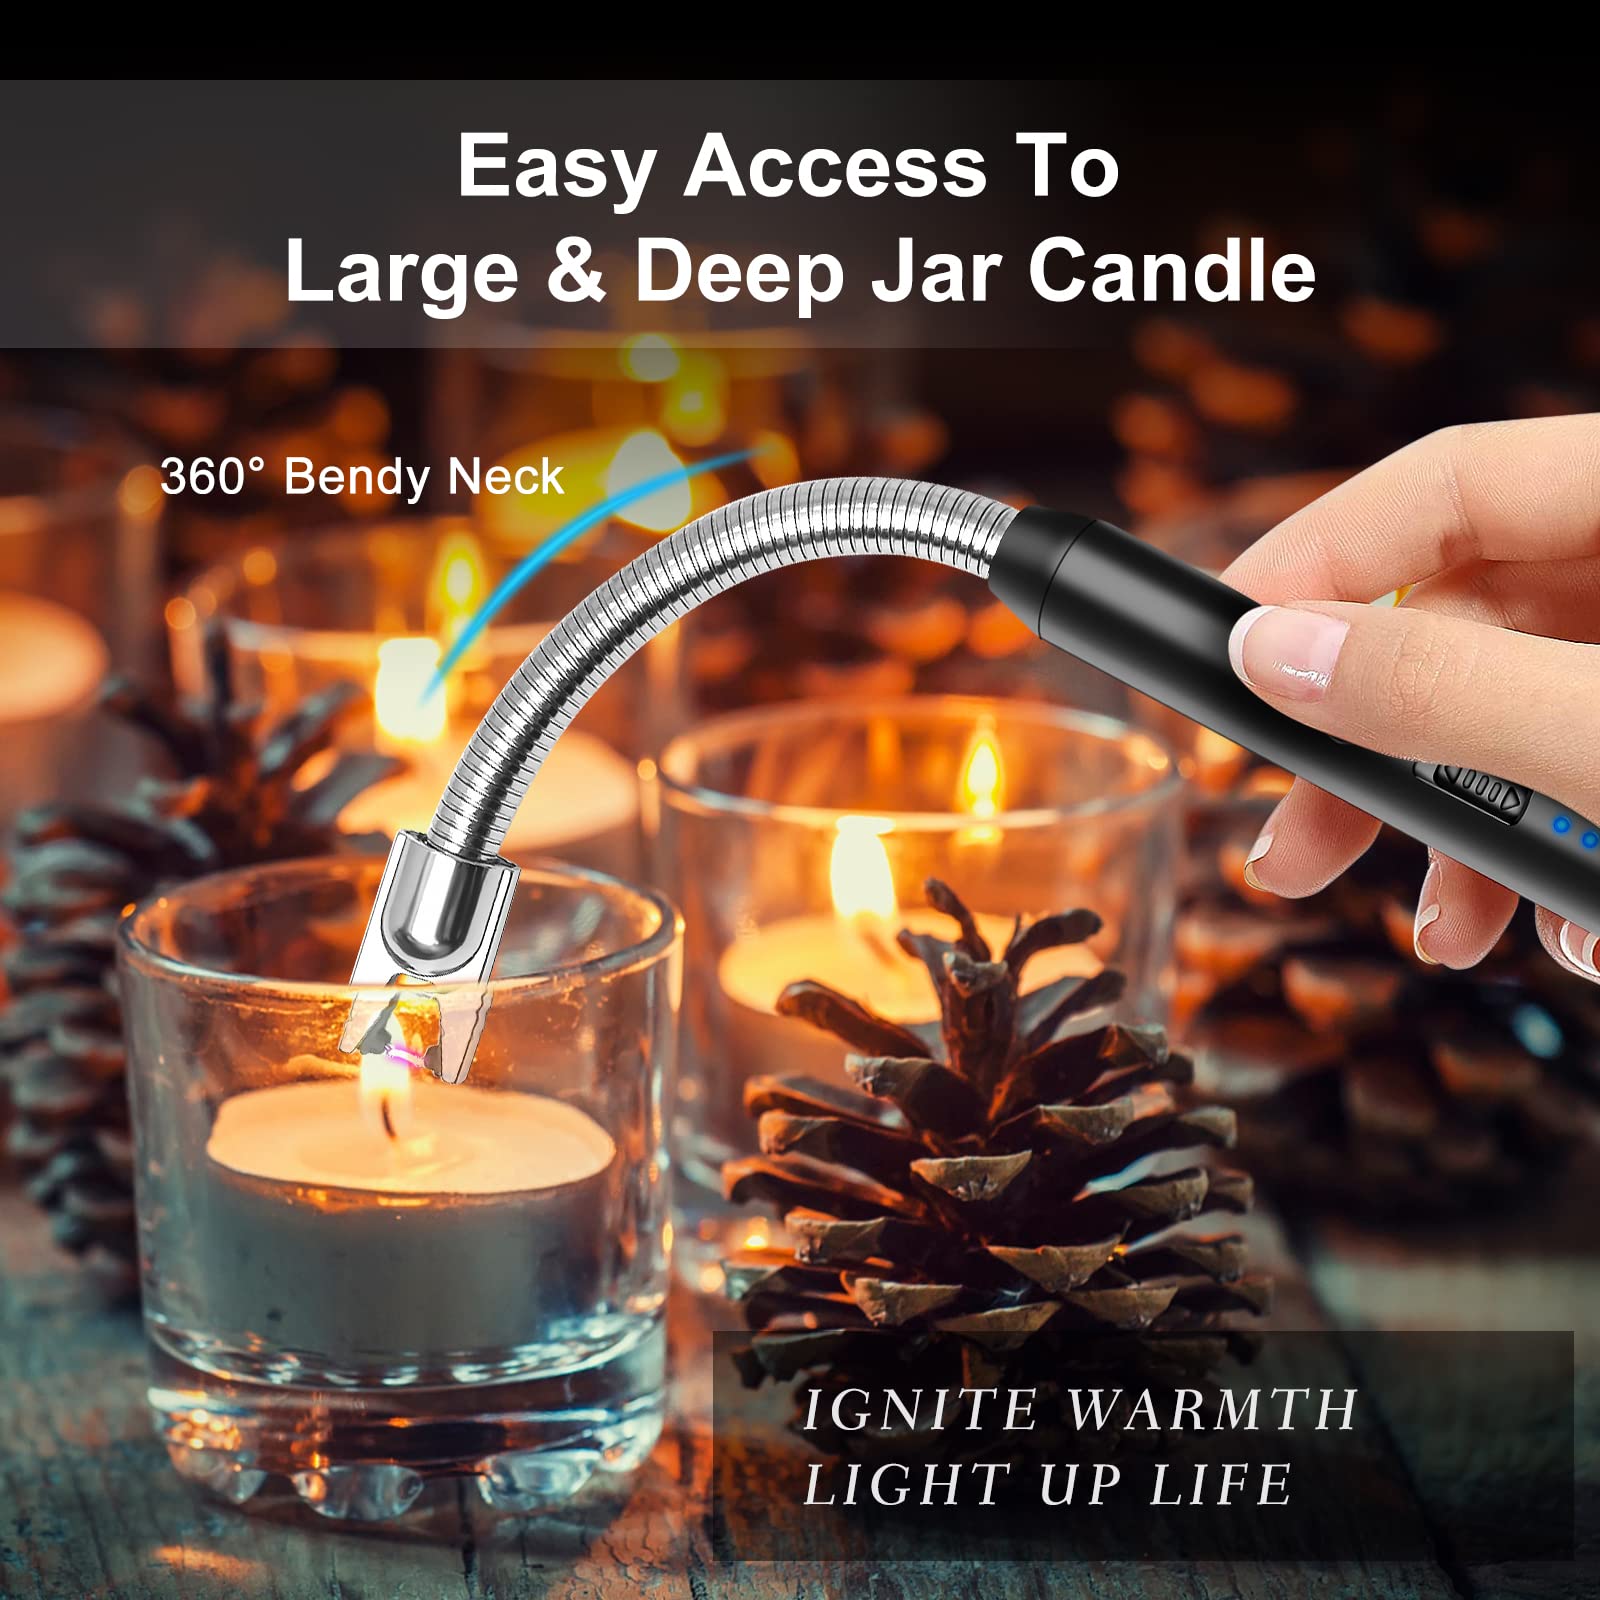 KTEBO 2Pcs Rechargeable Electric Lighters, TYPE-C Long Lighter Use Plasma Arc to Light Candle, Windproof Arc Lighter, Candle Lighter, BBQ Grill Lighter, Camping Accessories